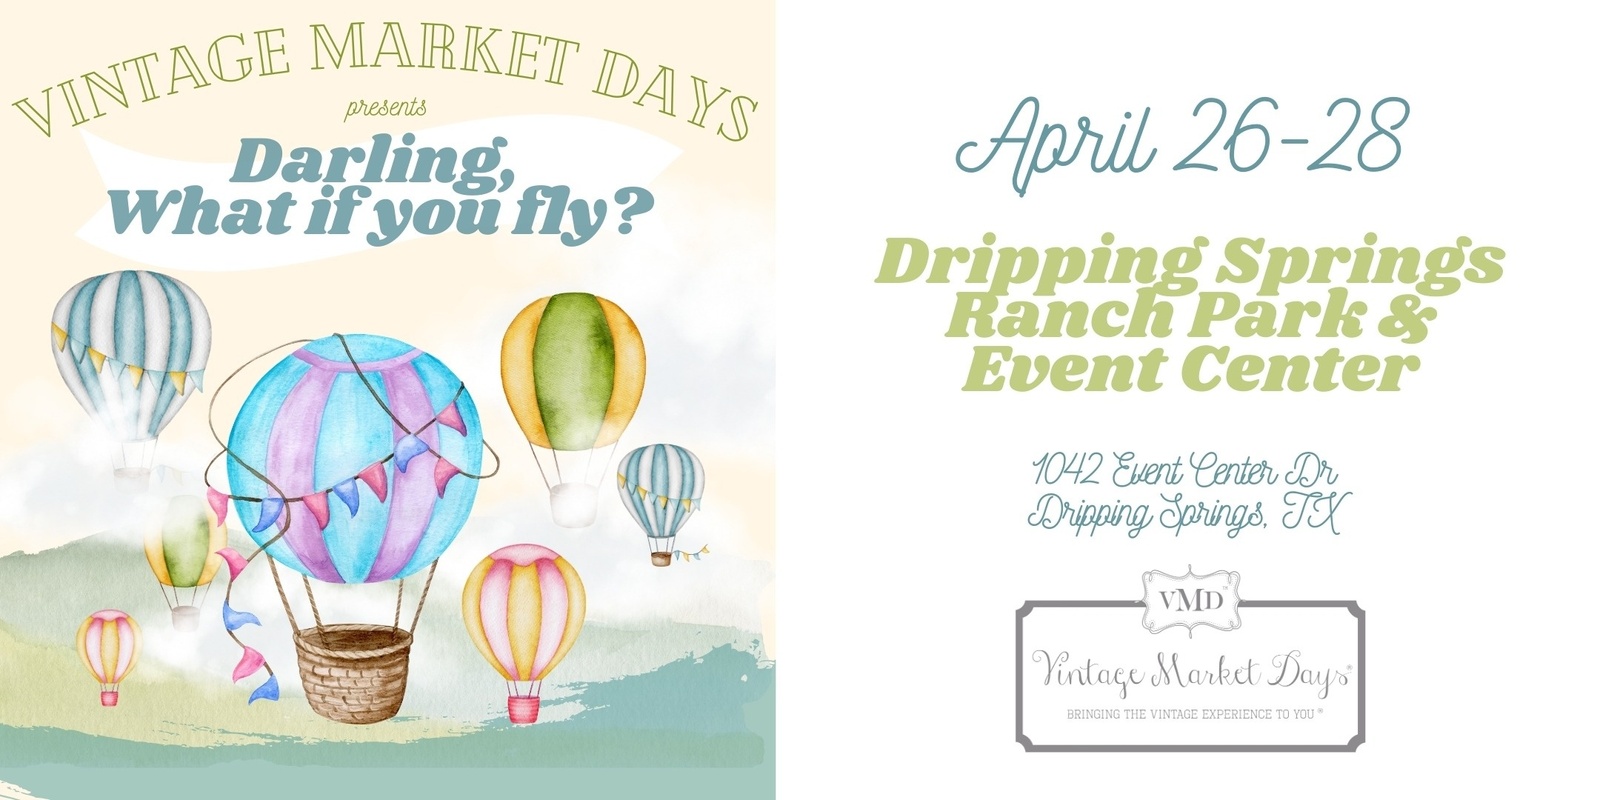 Banner image for Vintage Market Days® Greater Austin - Darling, What if you fly?